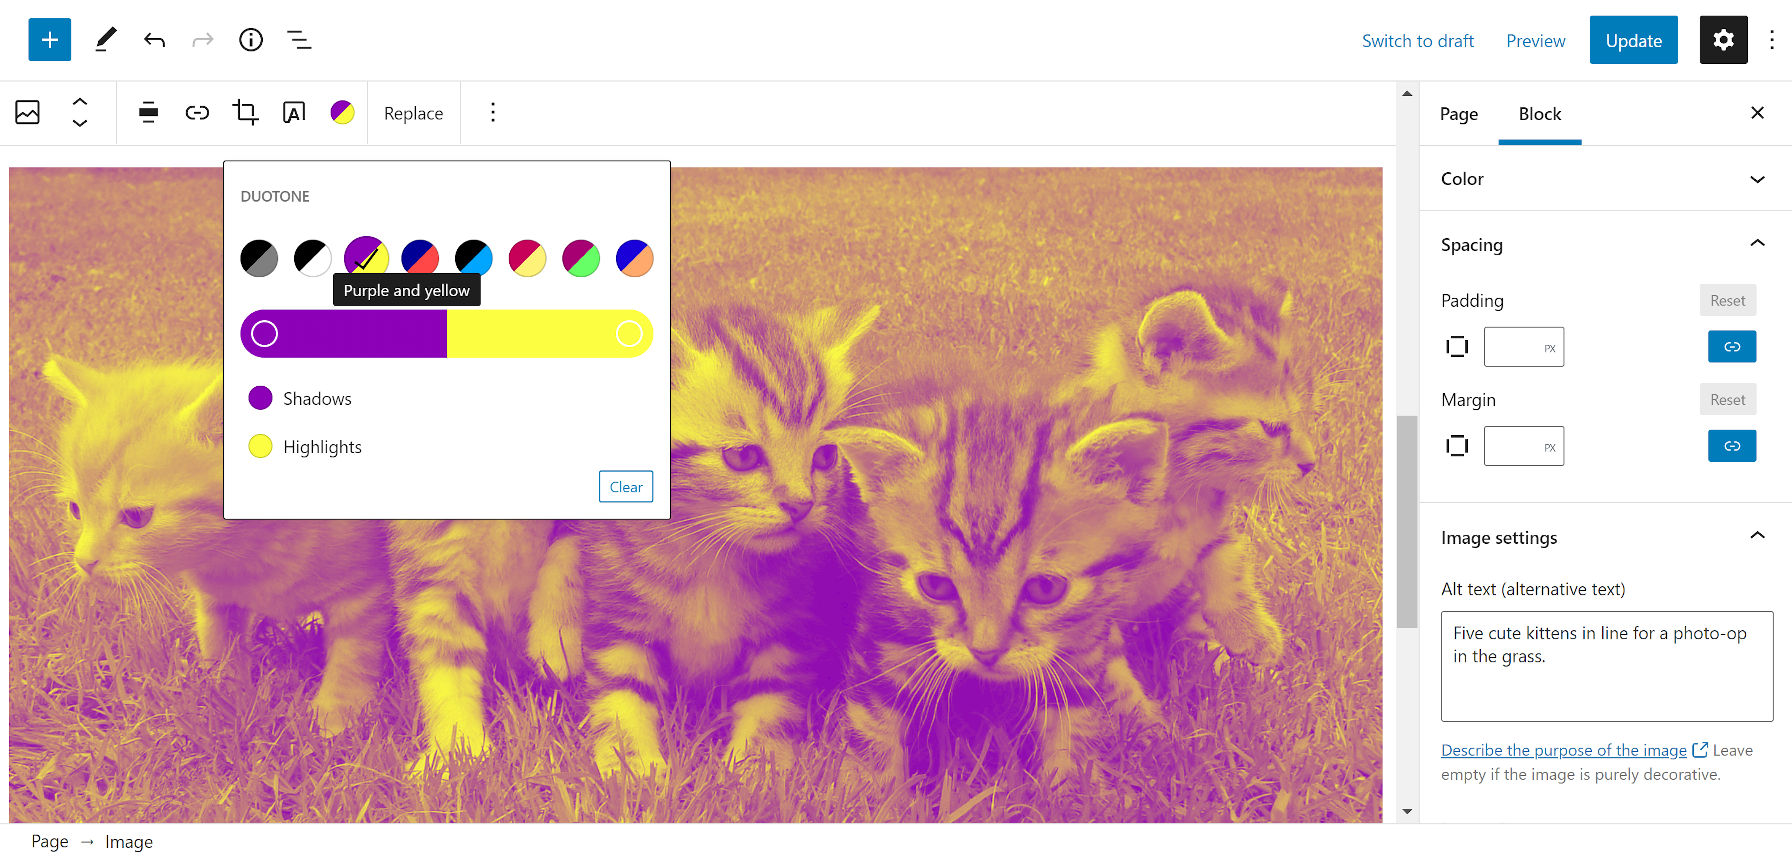 Adding a purple and yellow duotone filter over the top of an image of kittens in a field of grass.